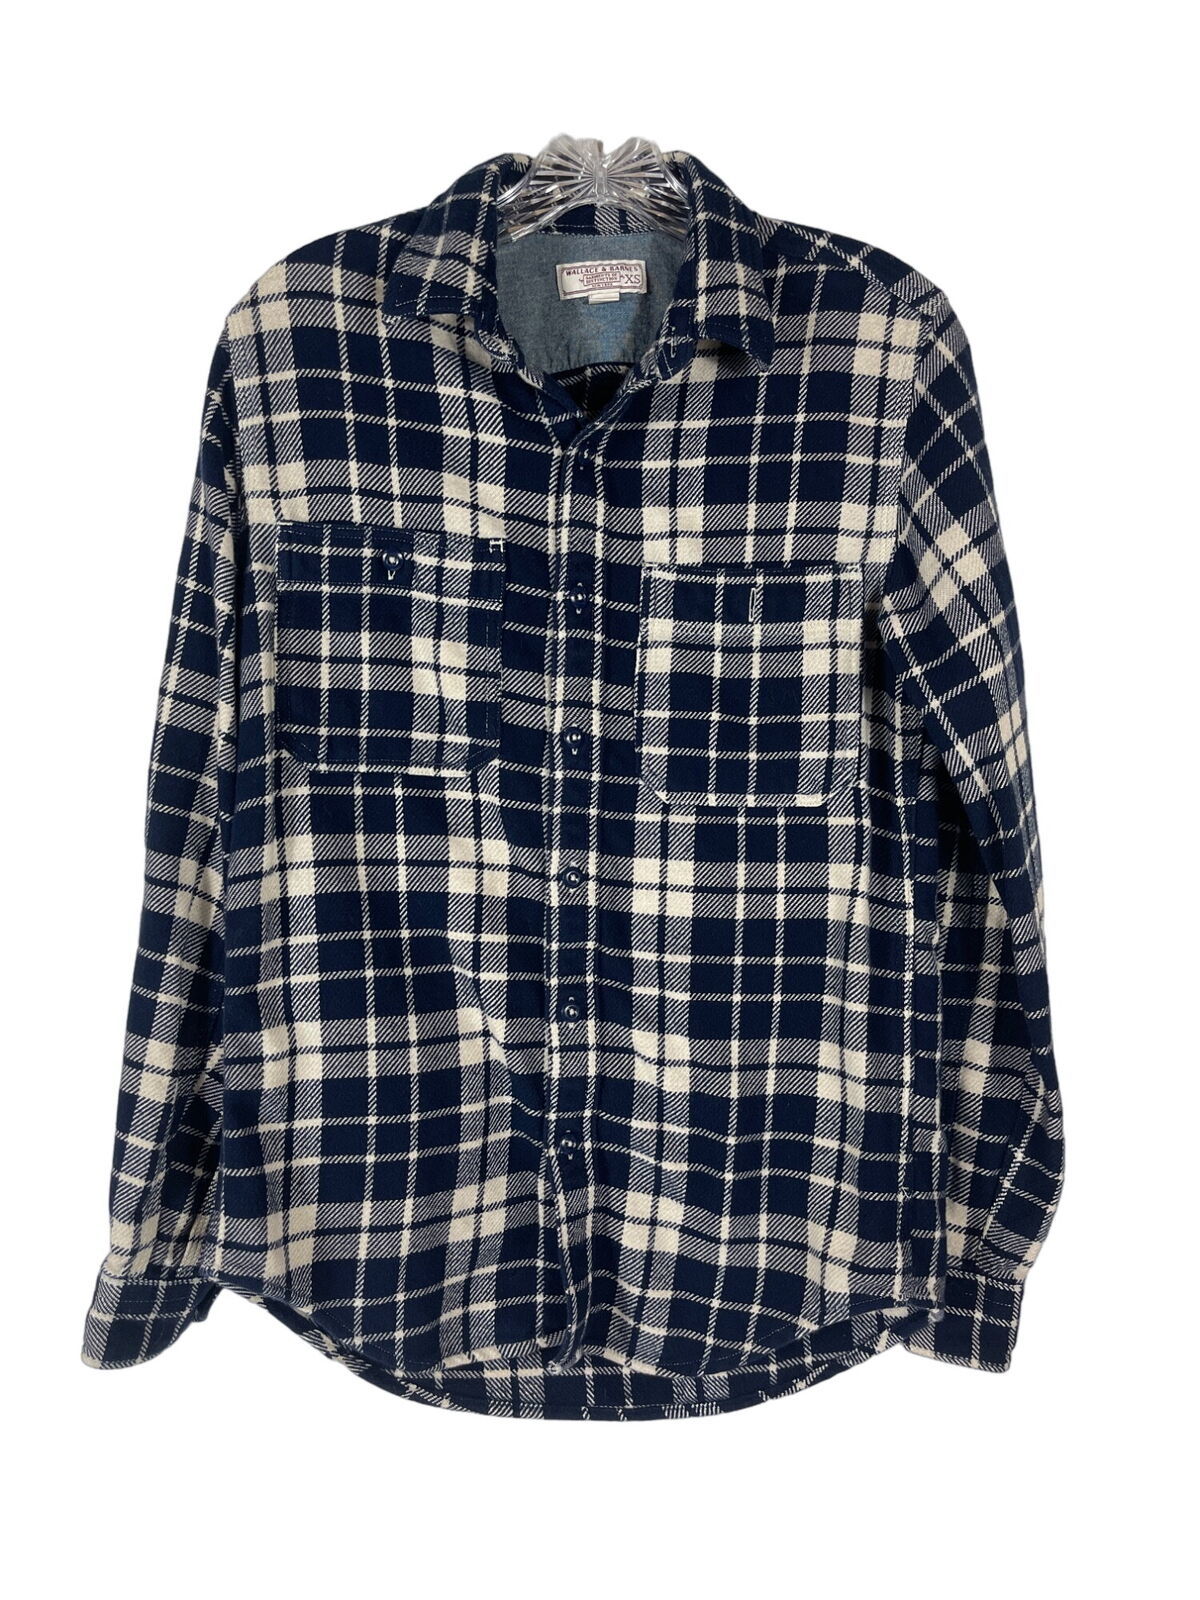 Primary image for Wallace and Barnes Mens Heavyweight Flannel Shirt Size XS Dark Blue Plaid